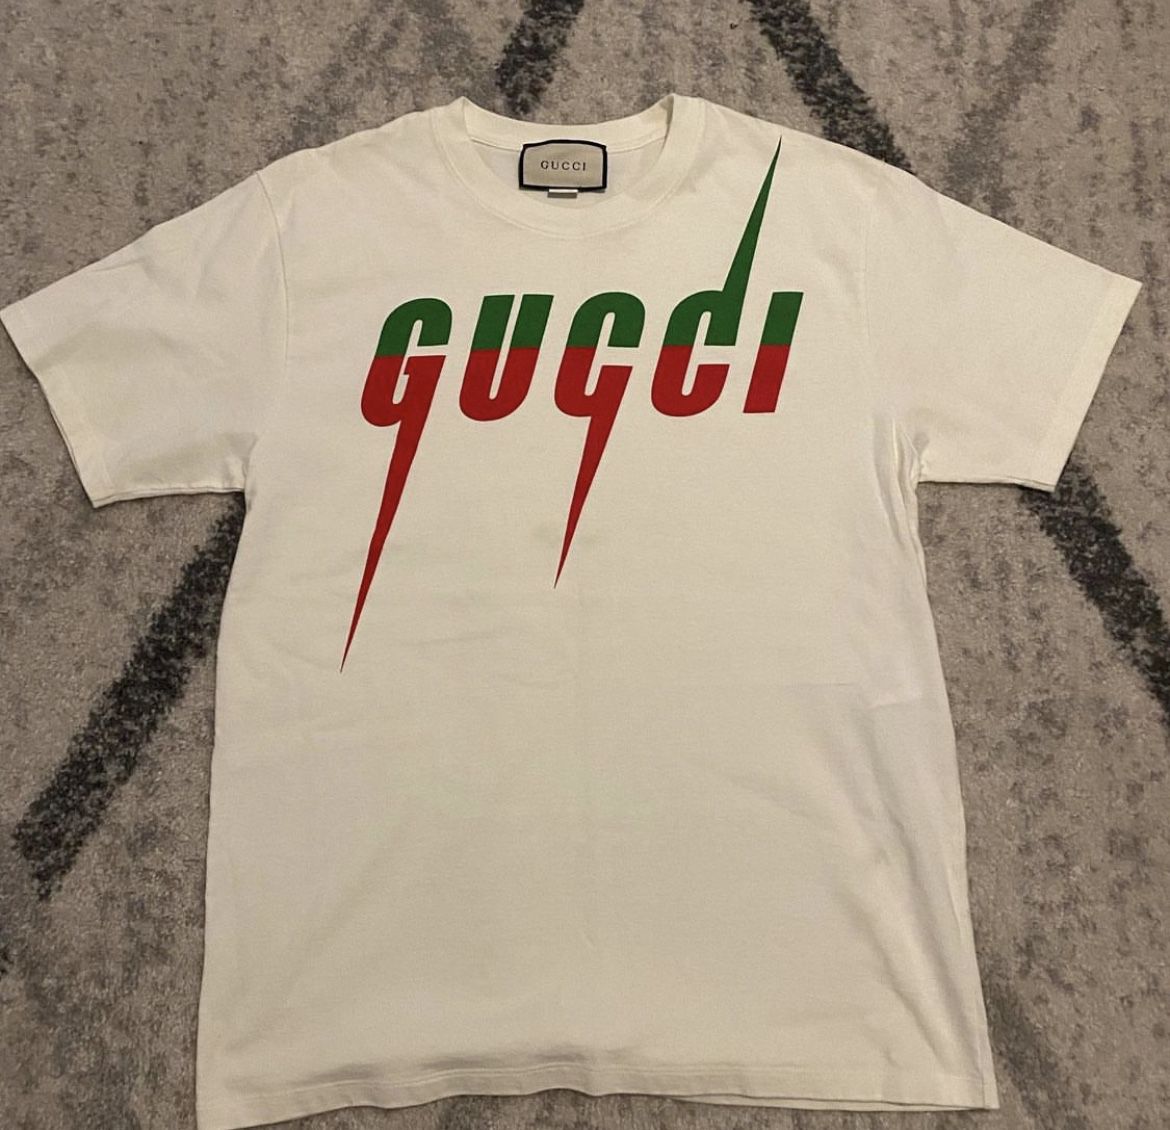 Gucci T-shirt Mideum for Sale in Deer Park, NY - OfferUp